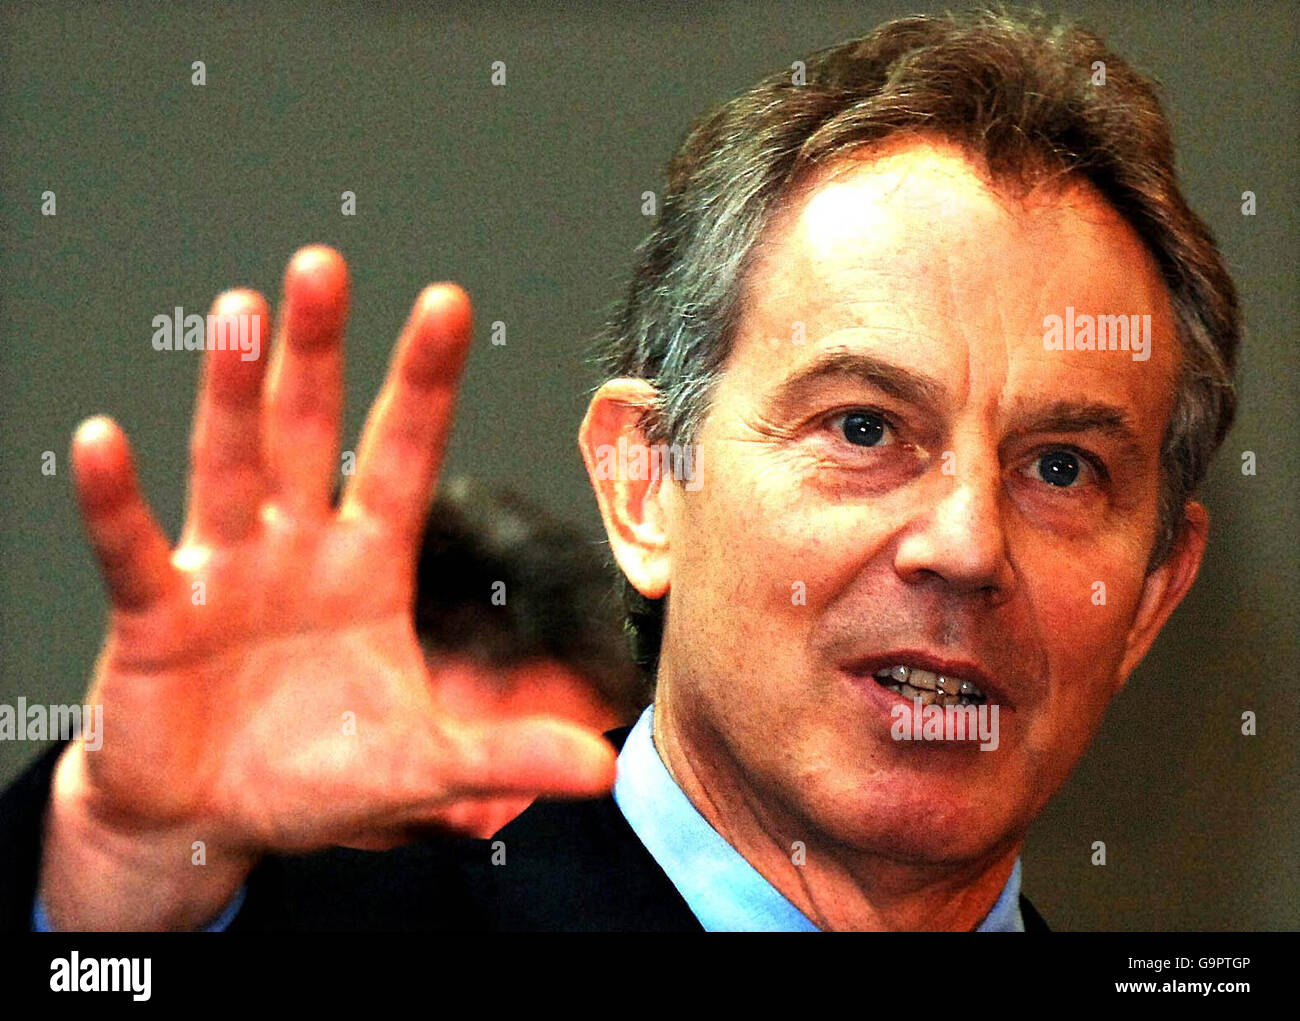 Britain's Prime Minister Tony Blair during a visit to an electric vehicle manufacturer in Birtley, Tyne and Wear. Stock Photo